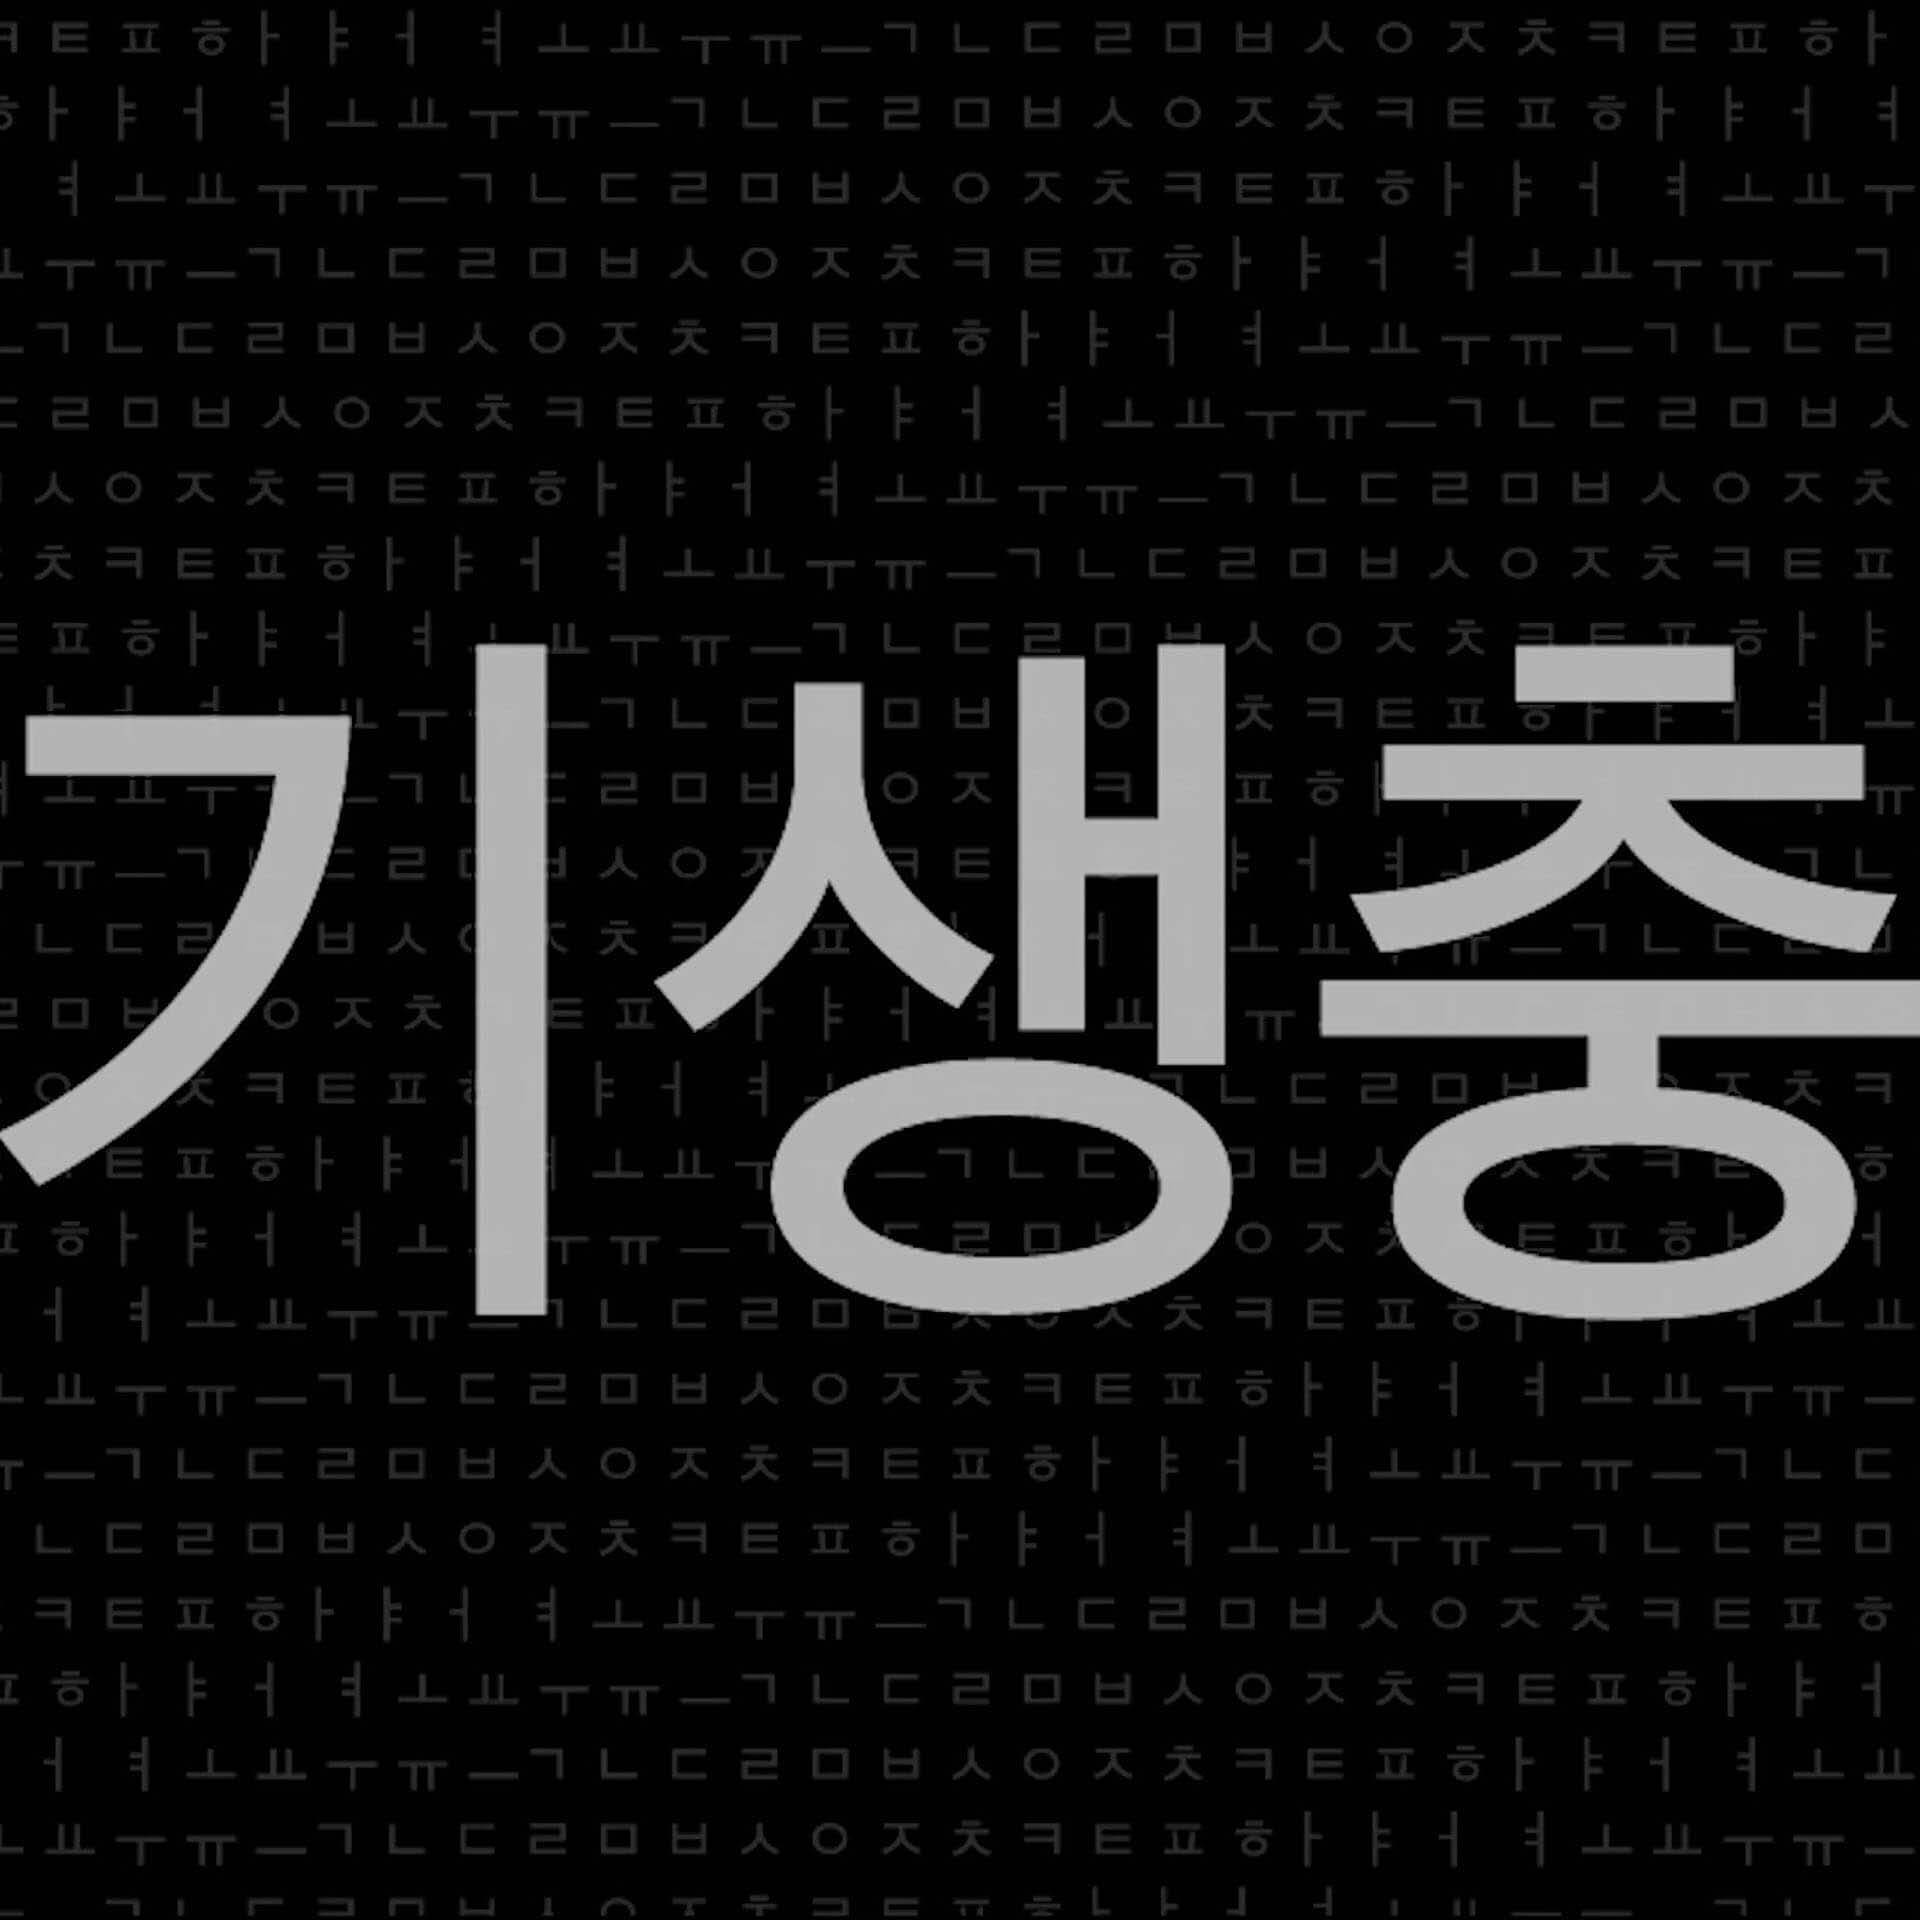 Digital image of large white Korea script on a black background. Small, dark grey Korean script forms a pattern in the background. Motion sequence for the film Parasite.